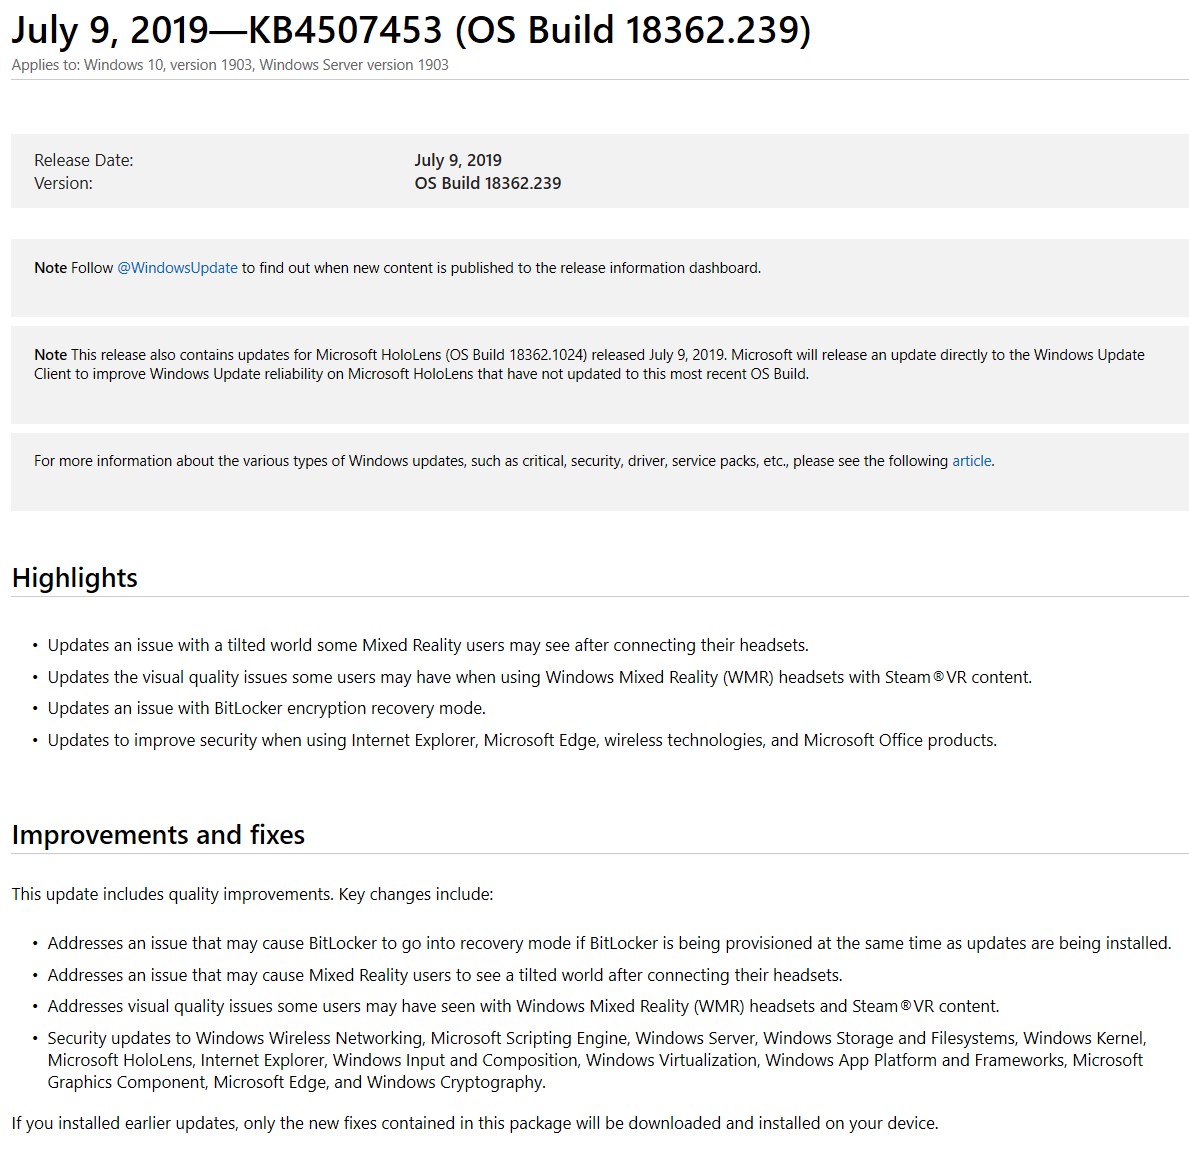 Windows 10 1903 Cumulative Update Is Availavble Today 7/9/19 bringing Build to (18362.239) 08bfe630-4aeb-442f-8f71-f5a376f975fe?upload=true.jpg